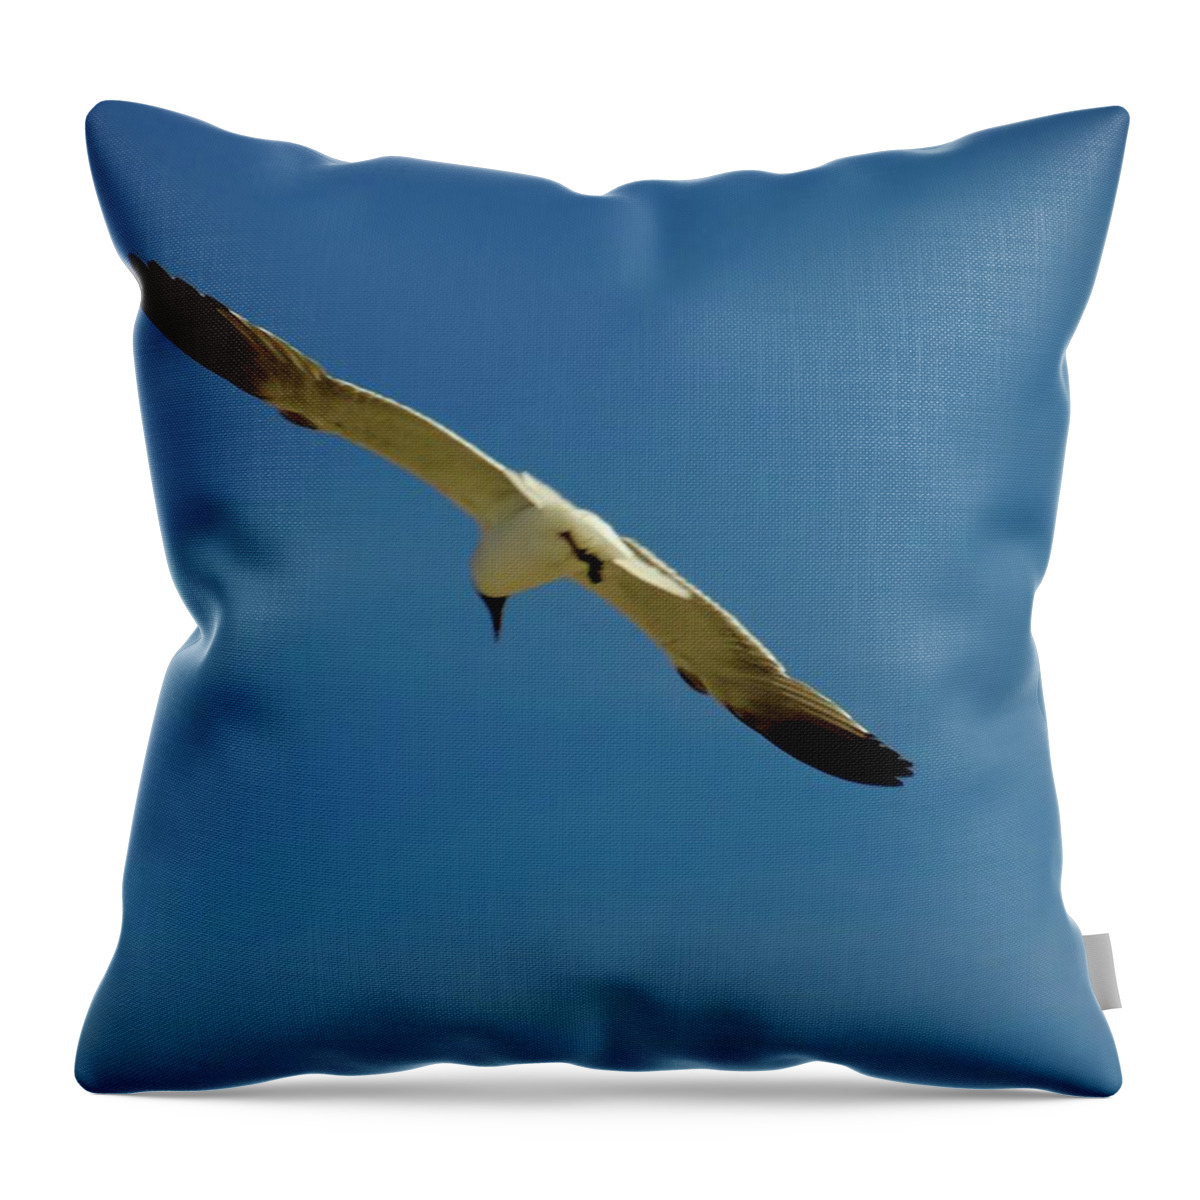 Laughing Gull Gliding Soaring Hunting Flying White Black Blue Sky Space Flight Bird Nature Grace Light Coasting Seashore Ocean Sand Sea Gull Salt Water Air Ocean City Throw Pillow featuring the photograph Summer Glider by Alida M Haslett